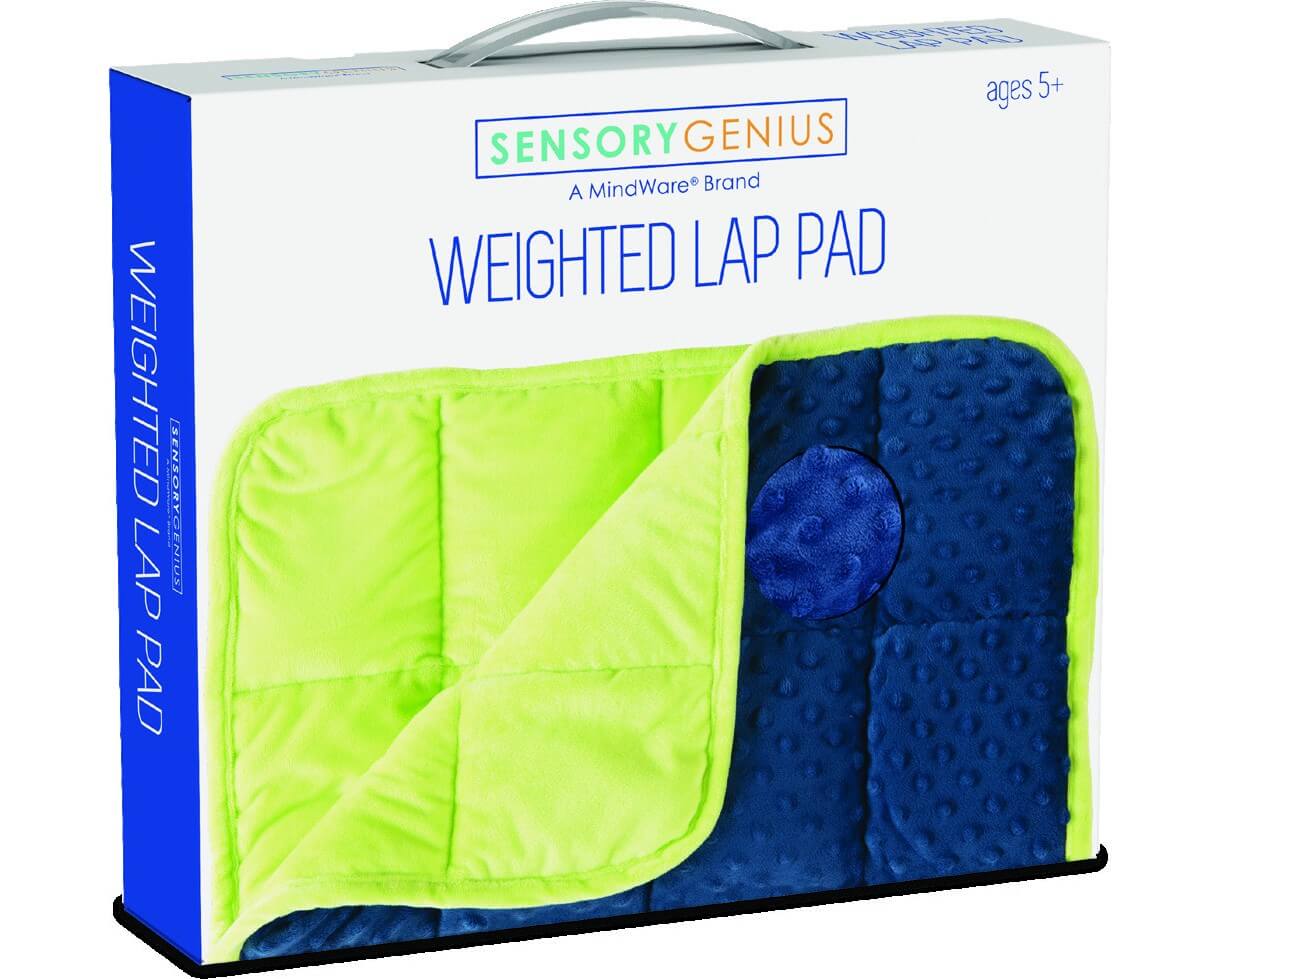 LL5017 Sensory Genius Weighted Lap Pad in box